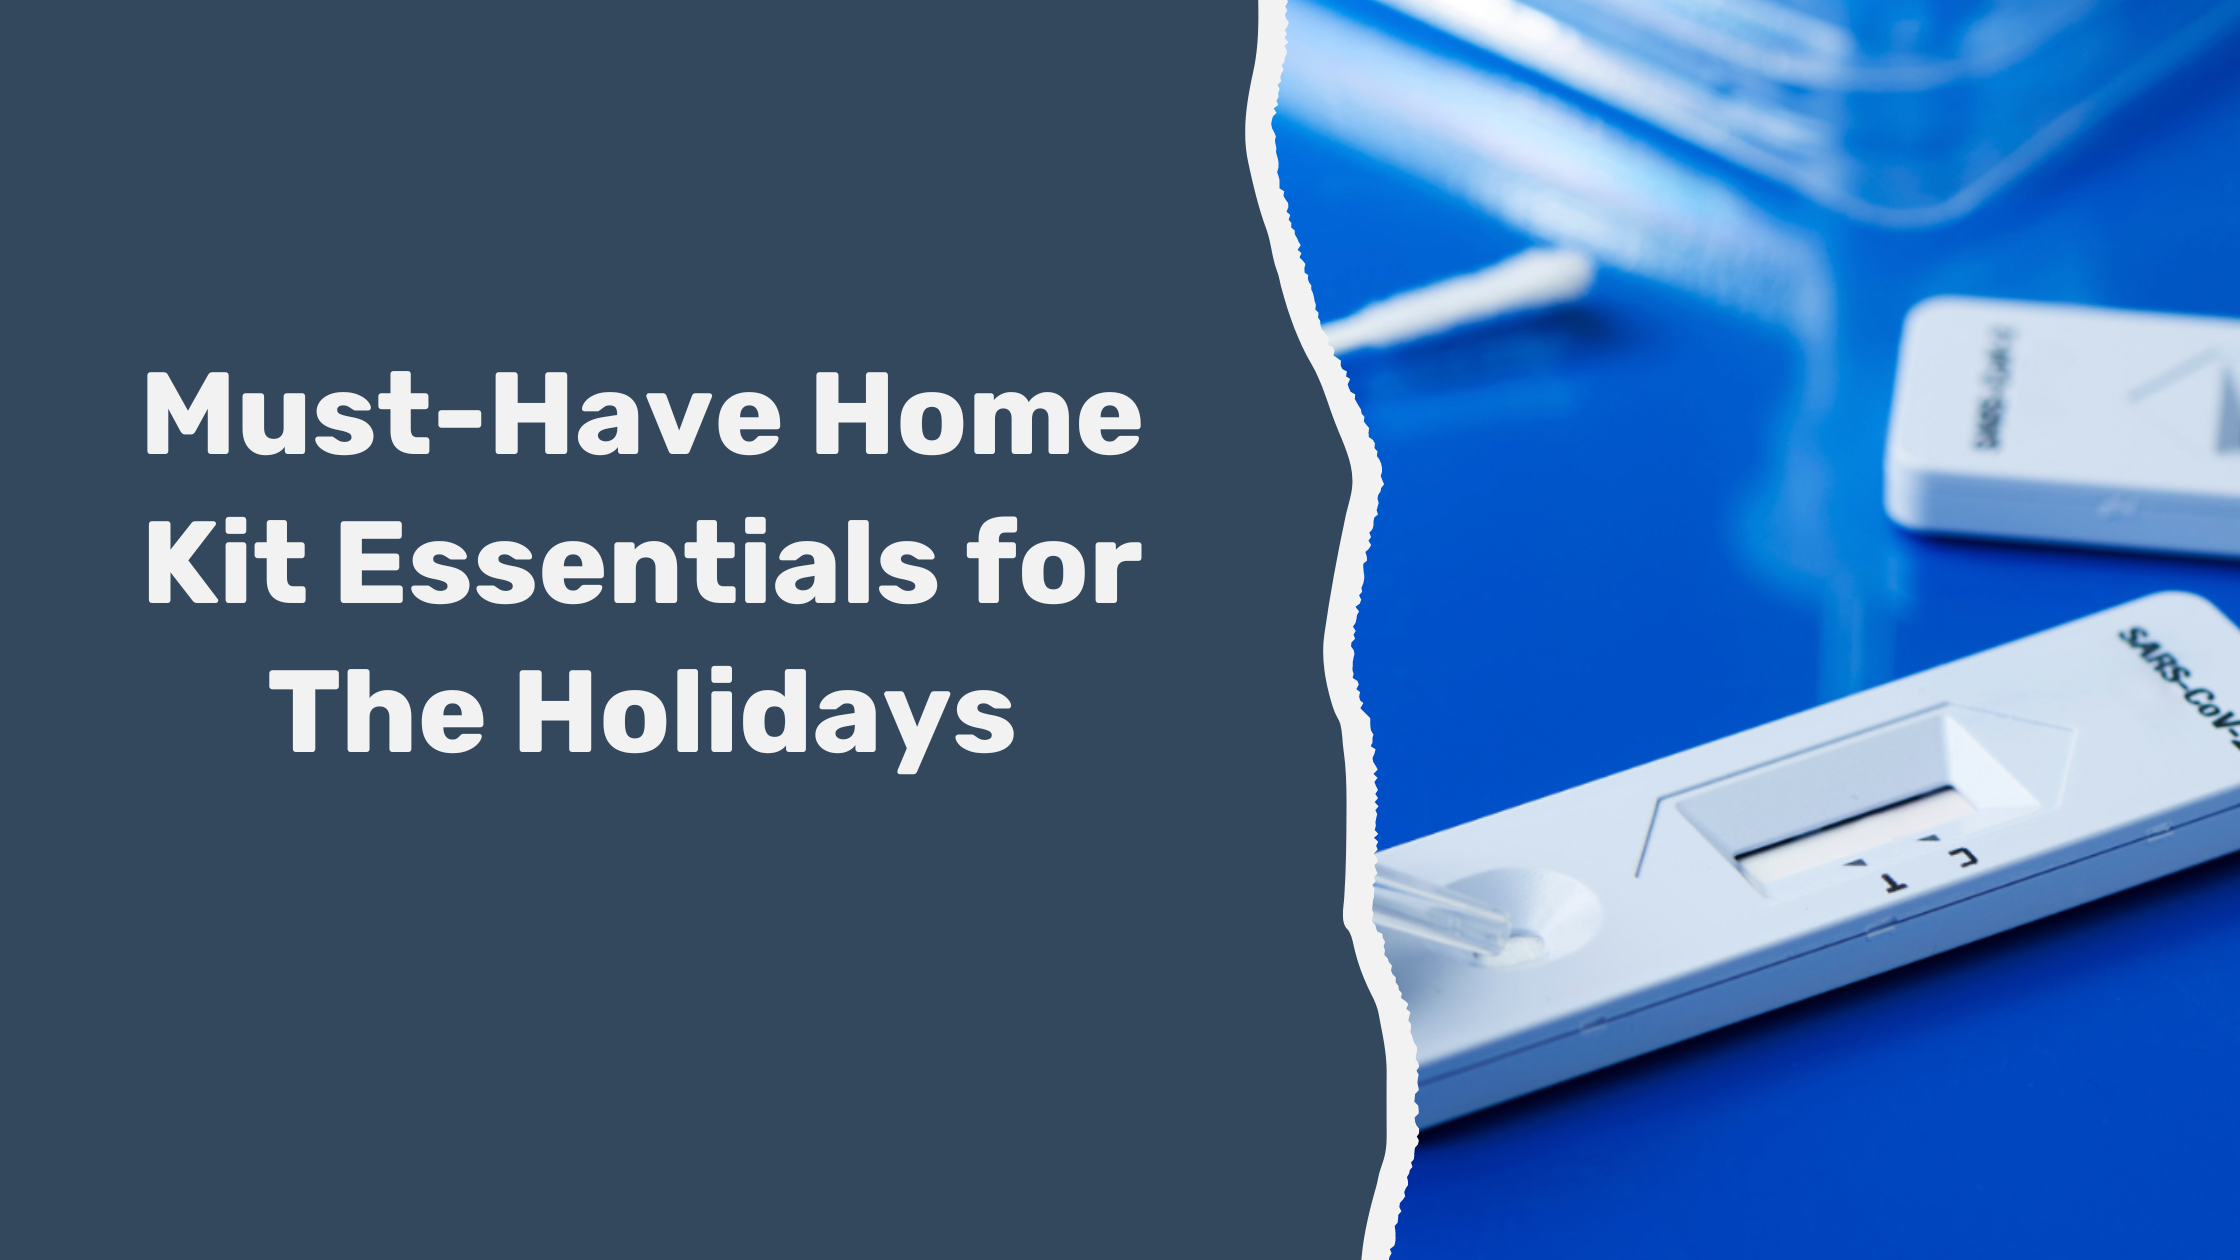 COVID-19: Here Are The Must-Have Home Kit Essentials for The Holidays